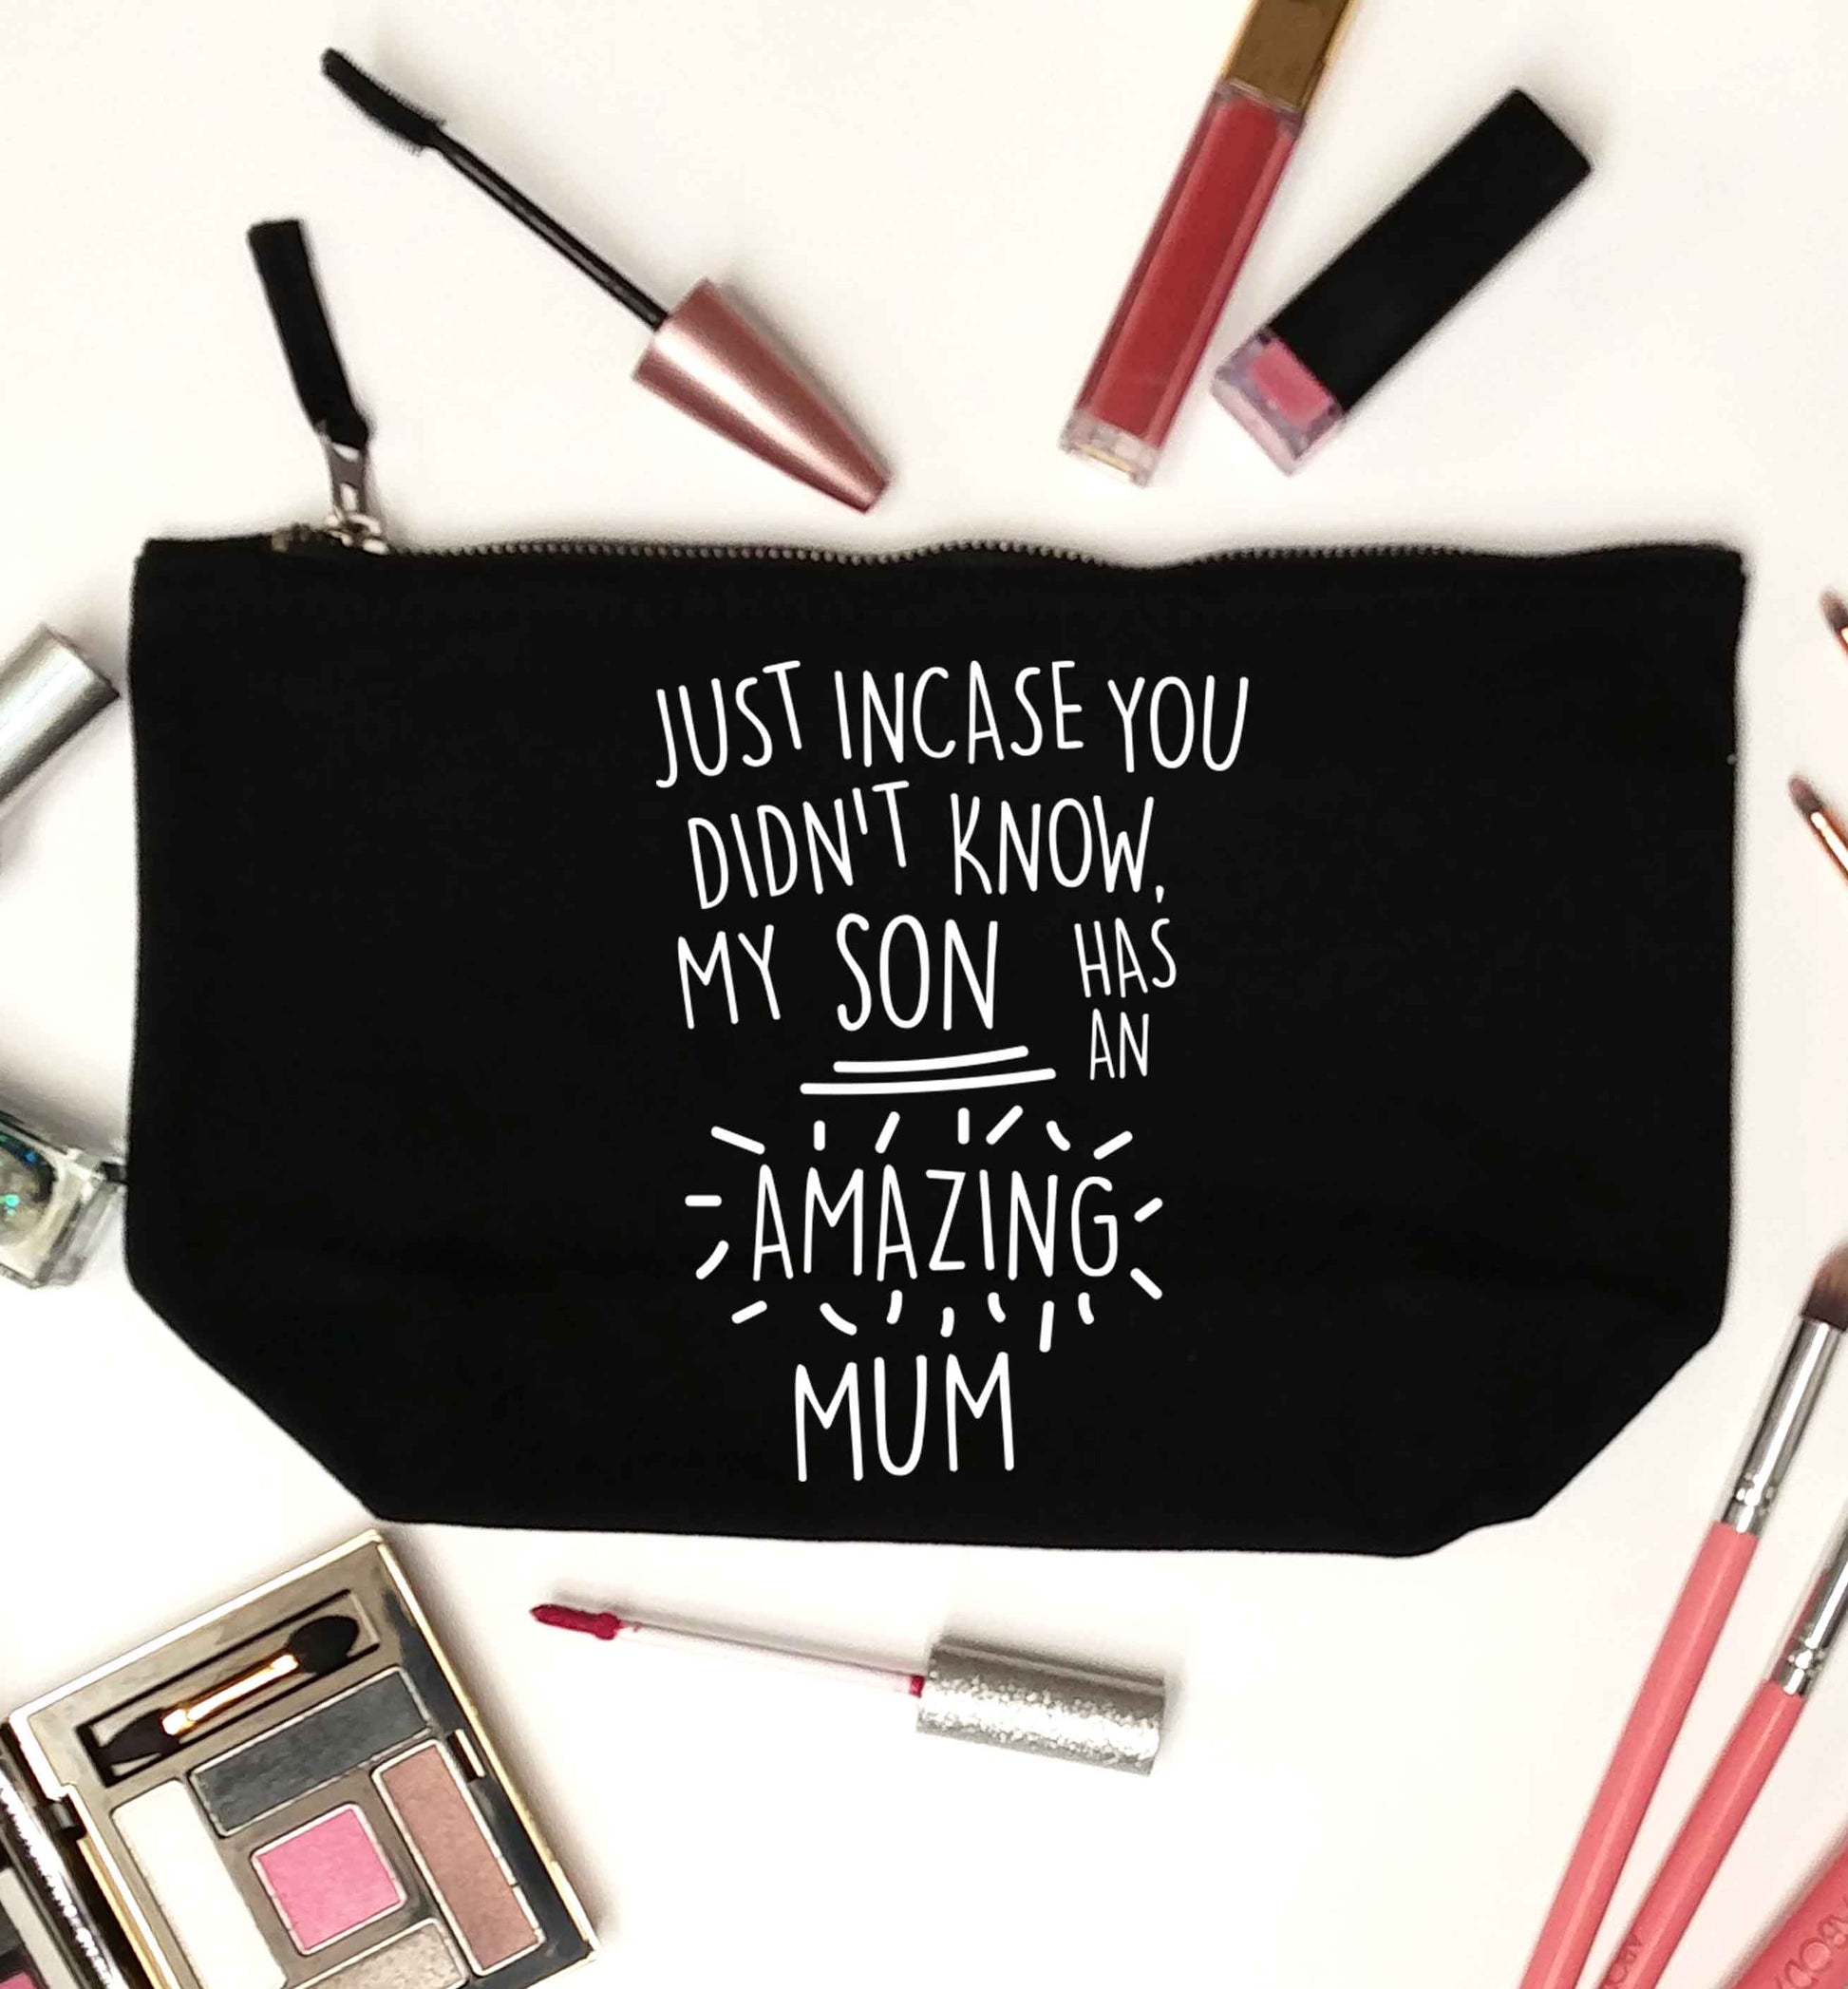 Just incase you didn't know my son has an amazing mum black makeup bag